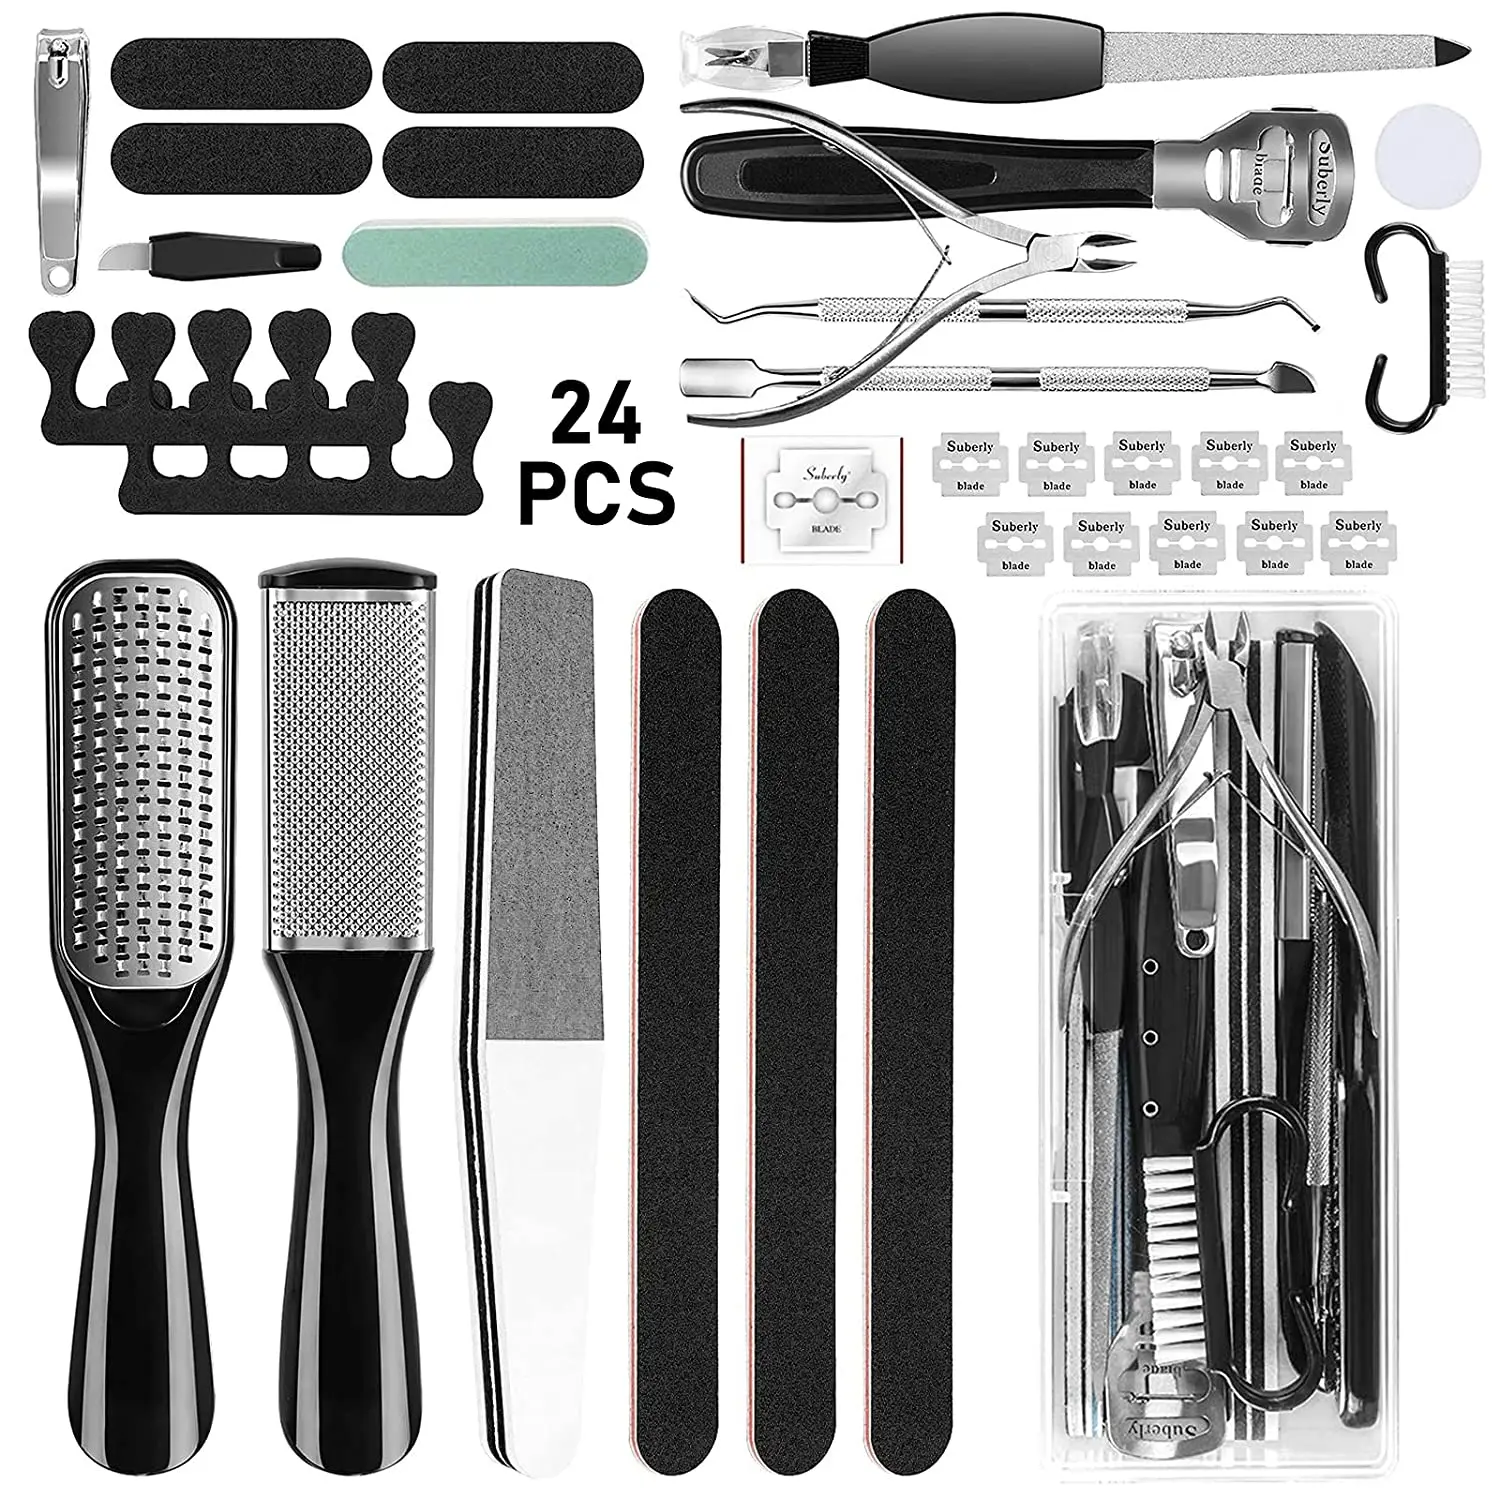 Pedicure Kit 24 in 1 Stainless Steel Pedicure Tools Set Professional Foot Care Kit Best Corn and Callus Remover for Women Men